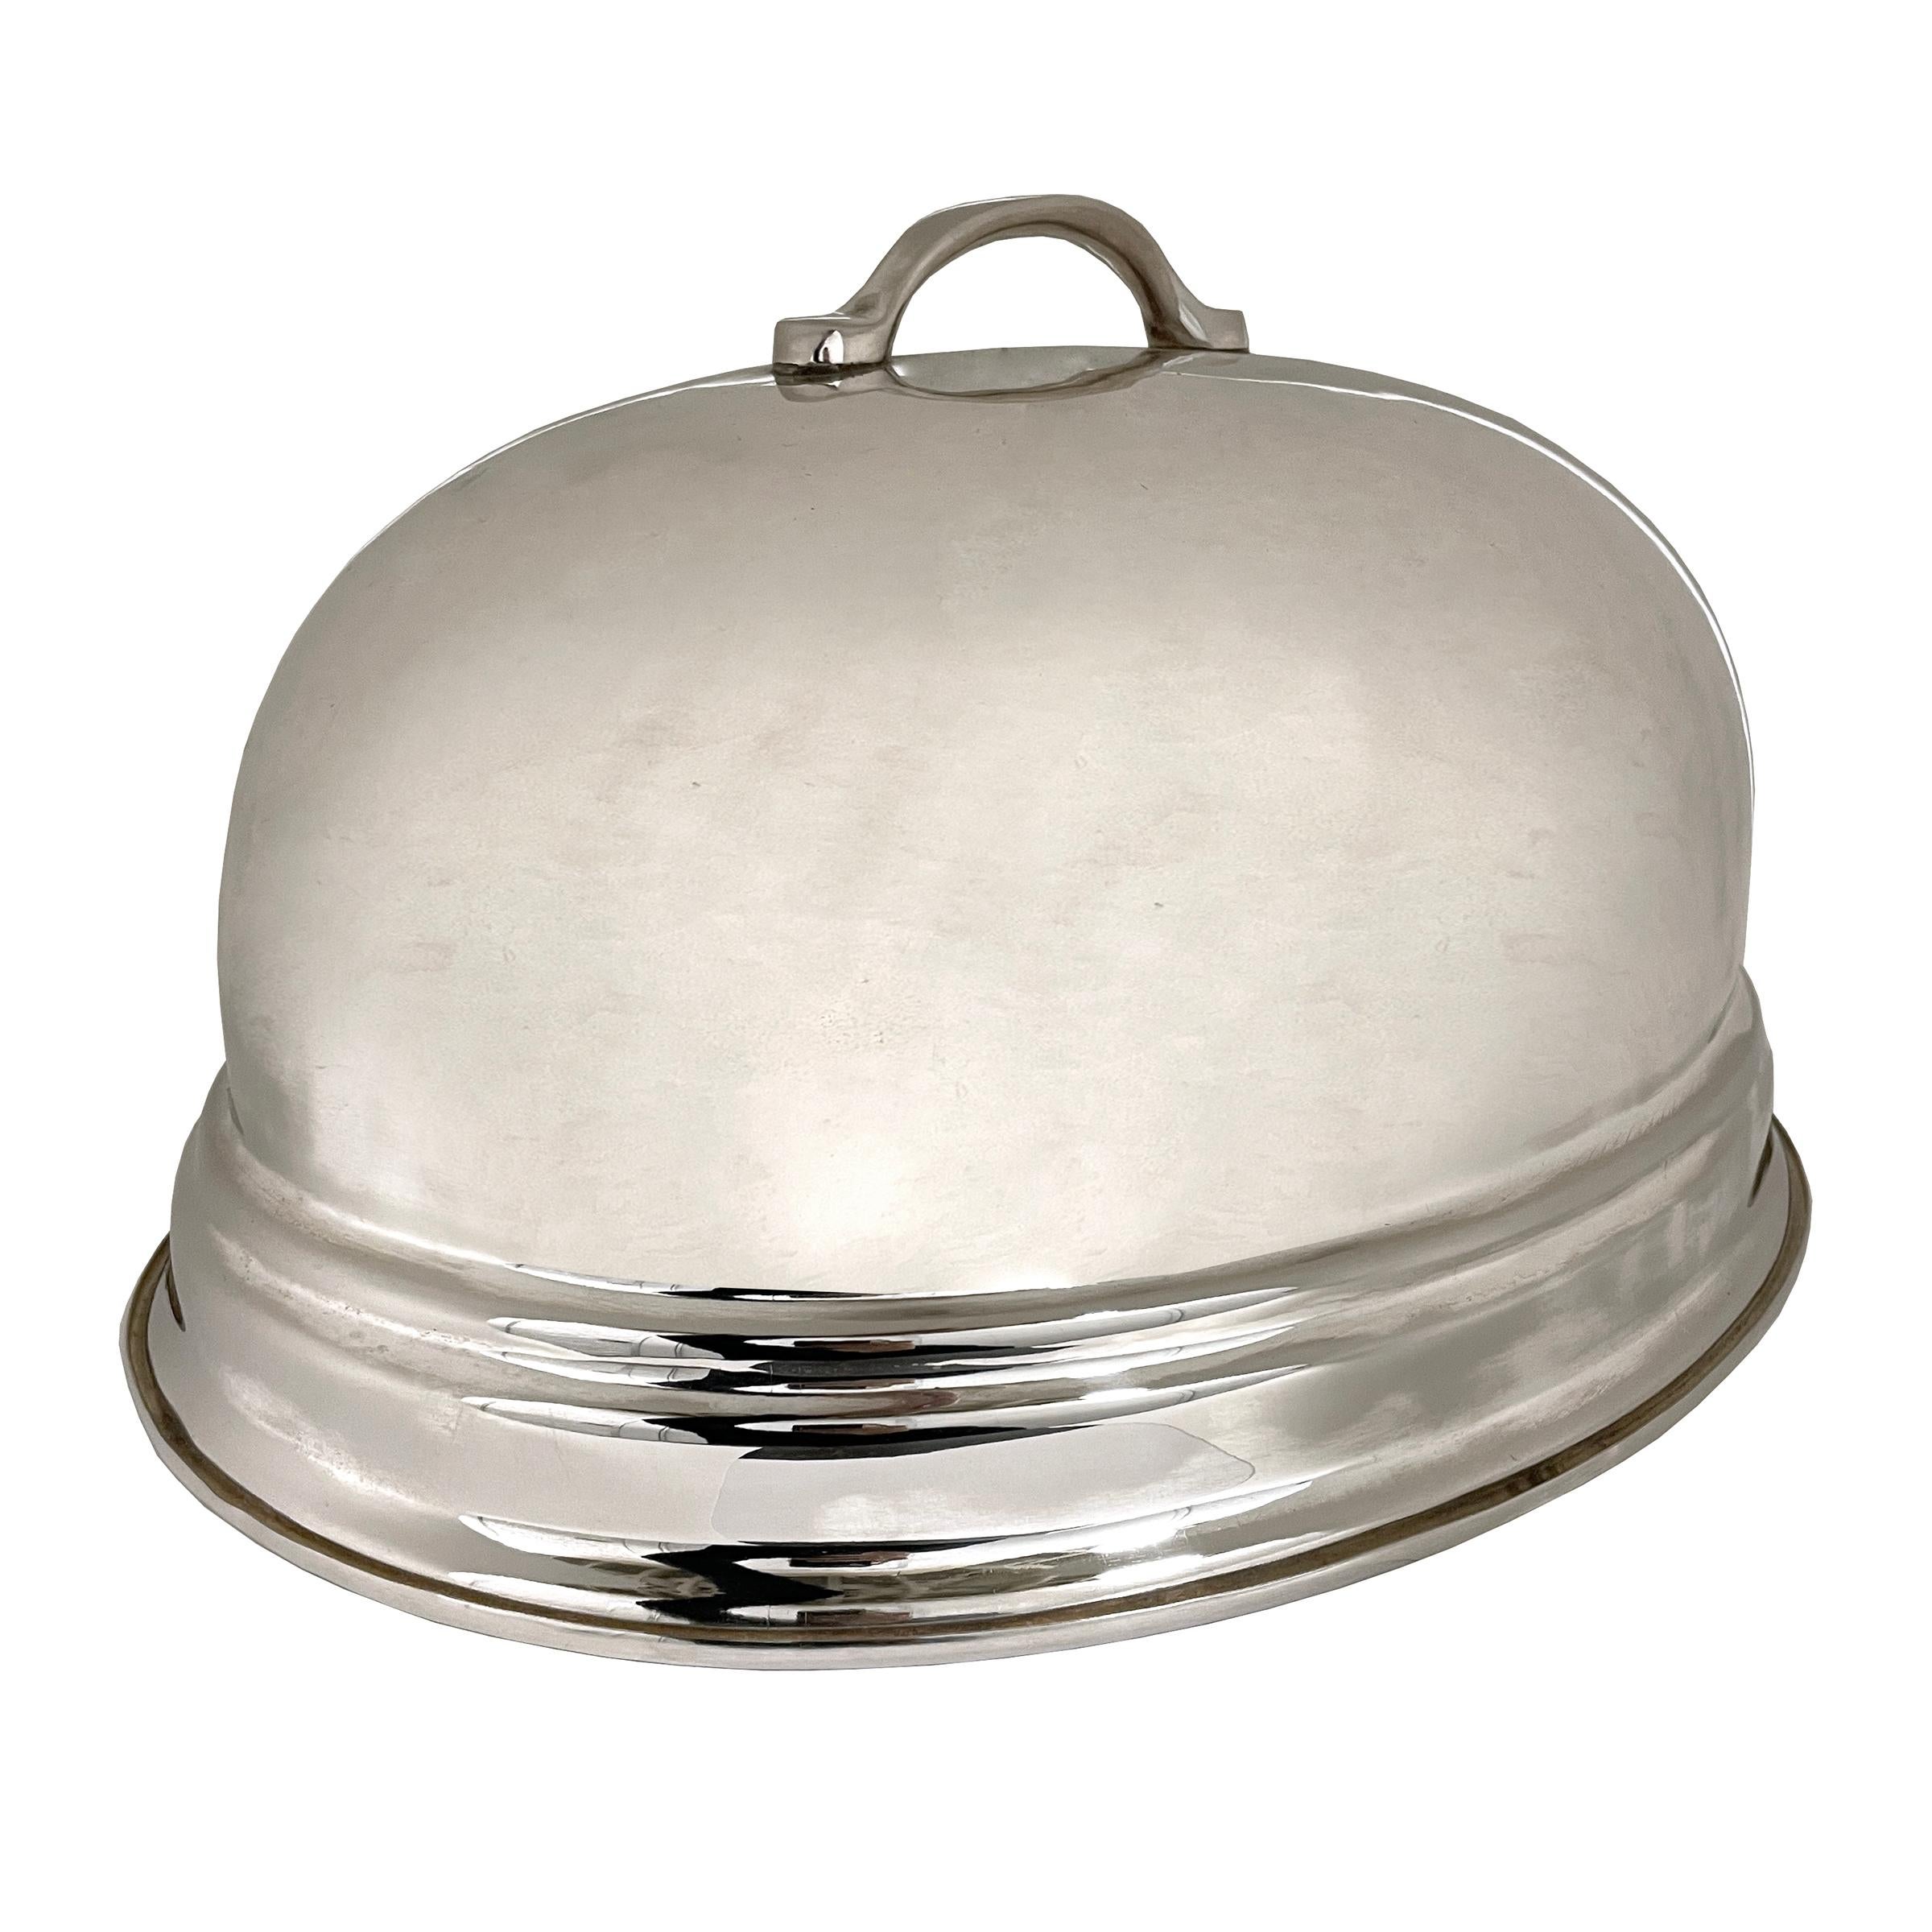 what is the silver dome that covers food called